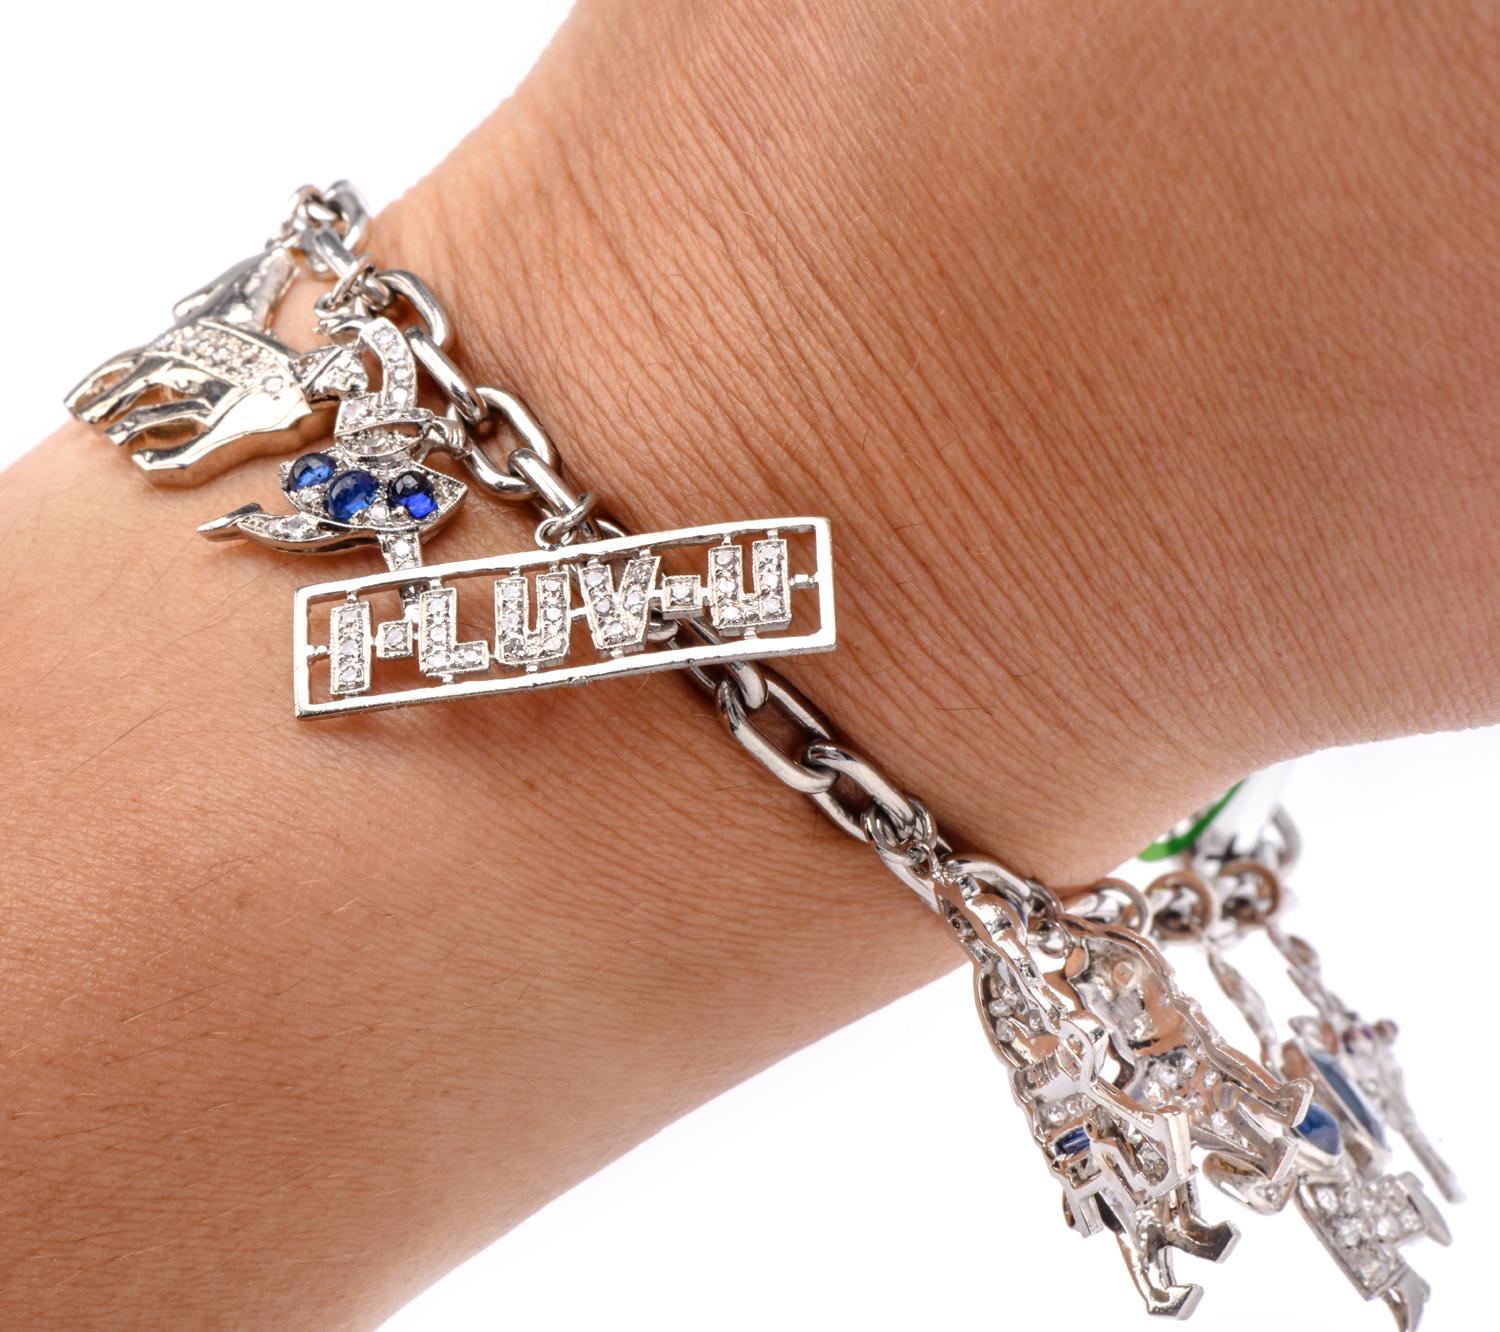 This Vintage nautical-themed diamond, sapphire, emerald, and ruby charm bracelet is crafted in solid platinum. Composed of interlocking heavy oval-shaped links. The bracelet is enriched with eleven charms including a pave diamond and sapphire